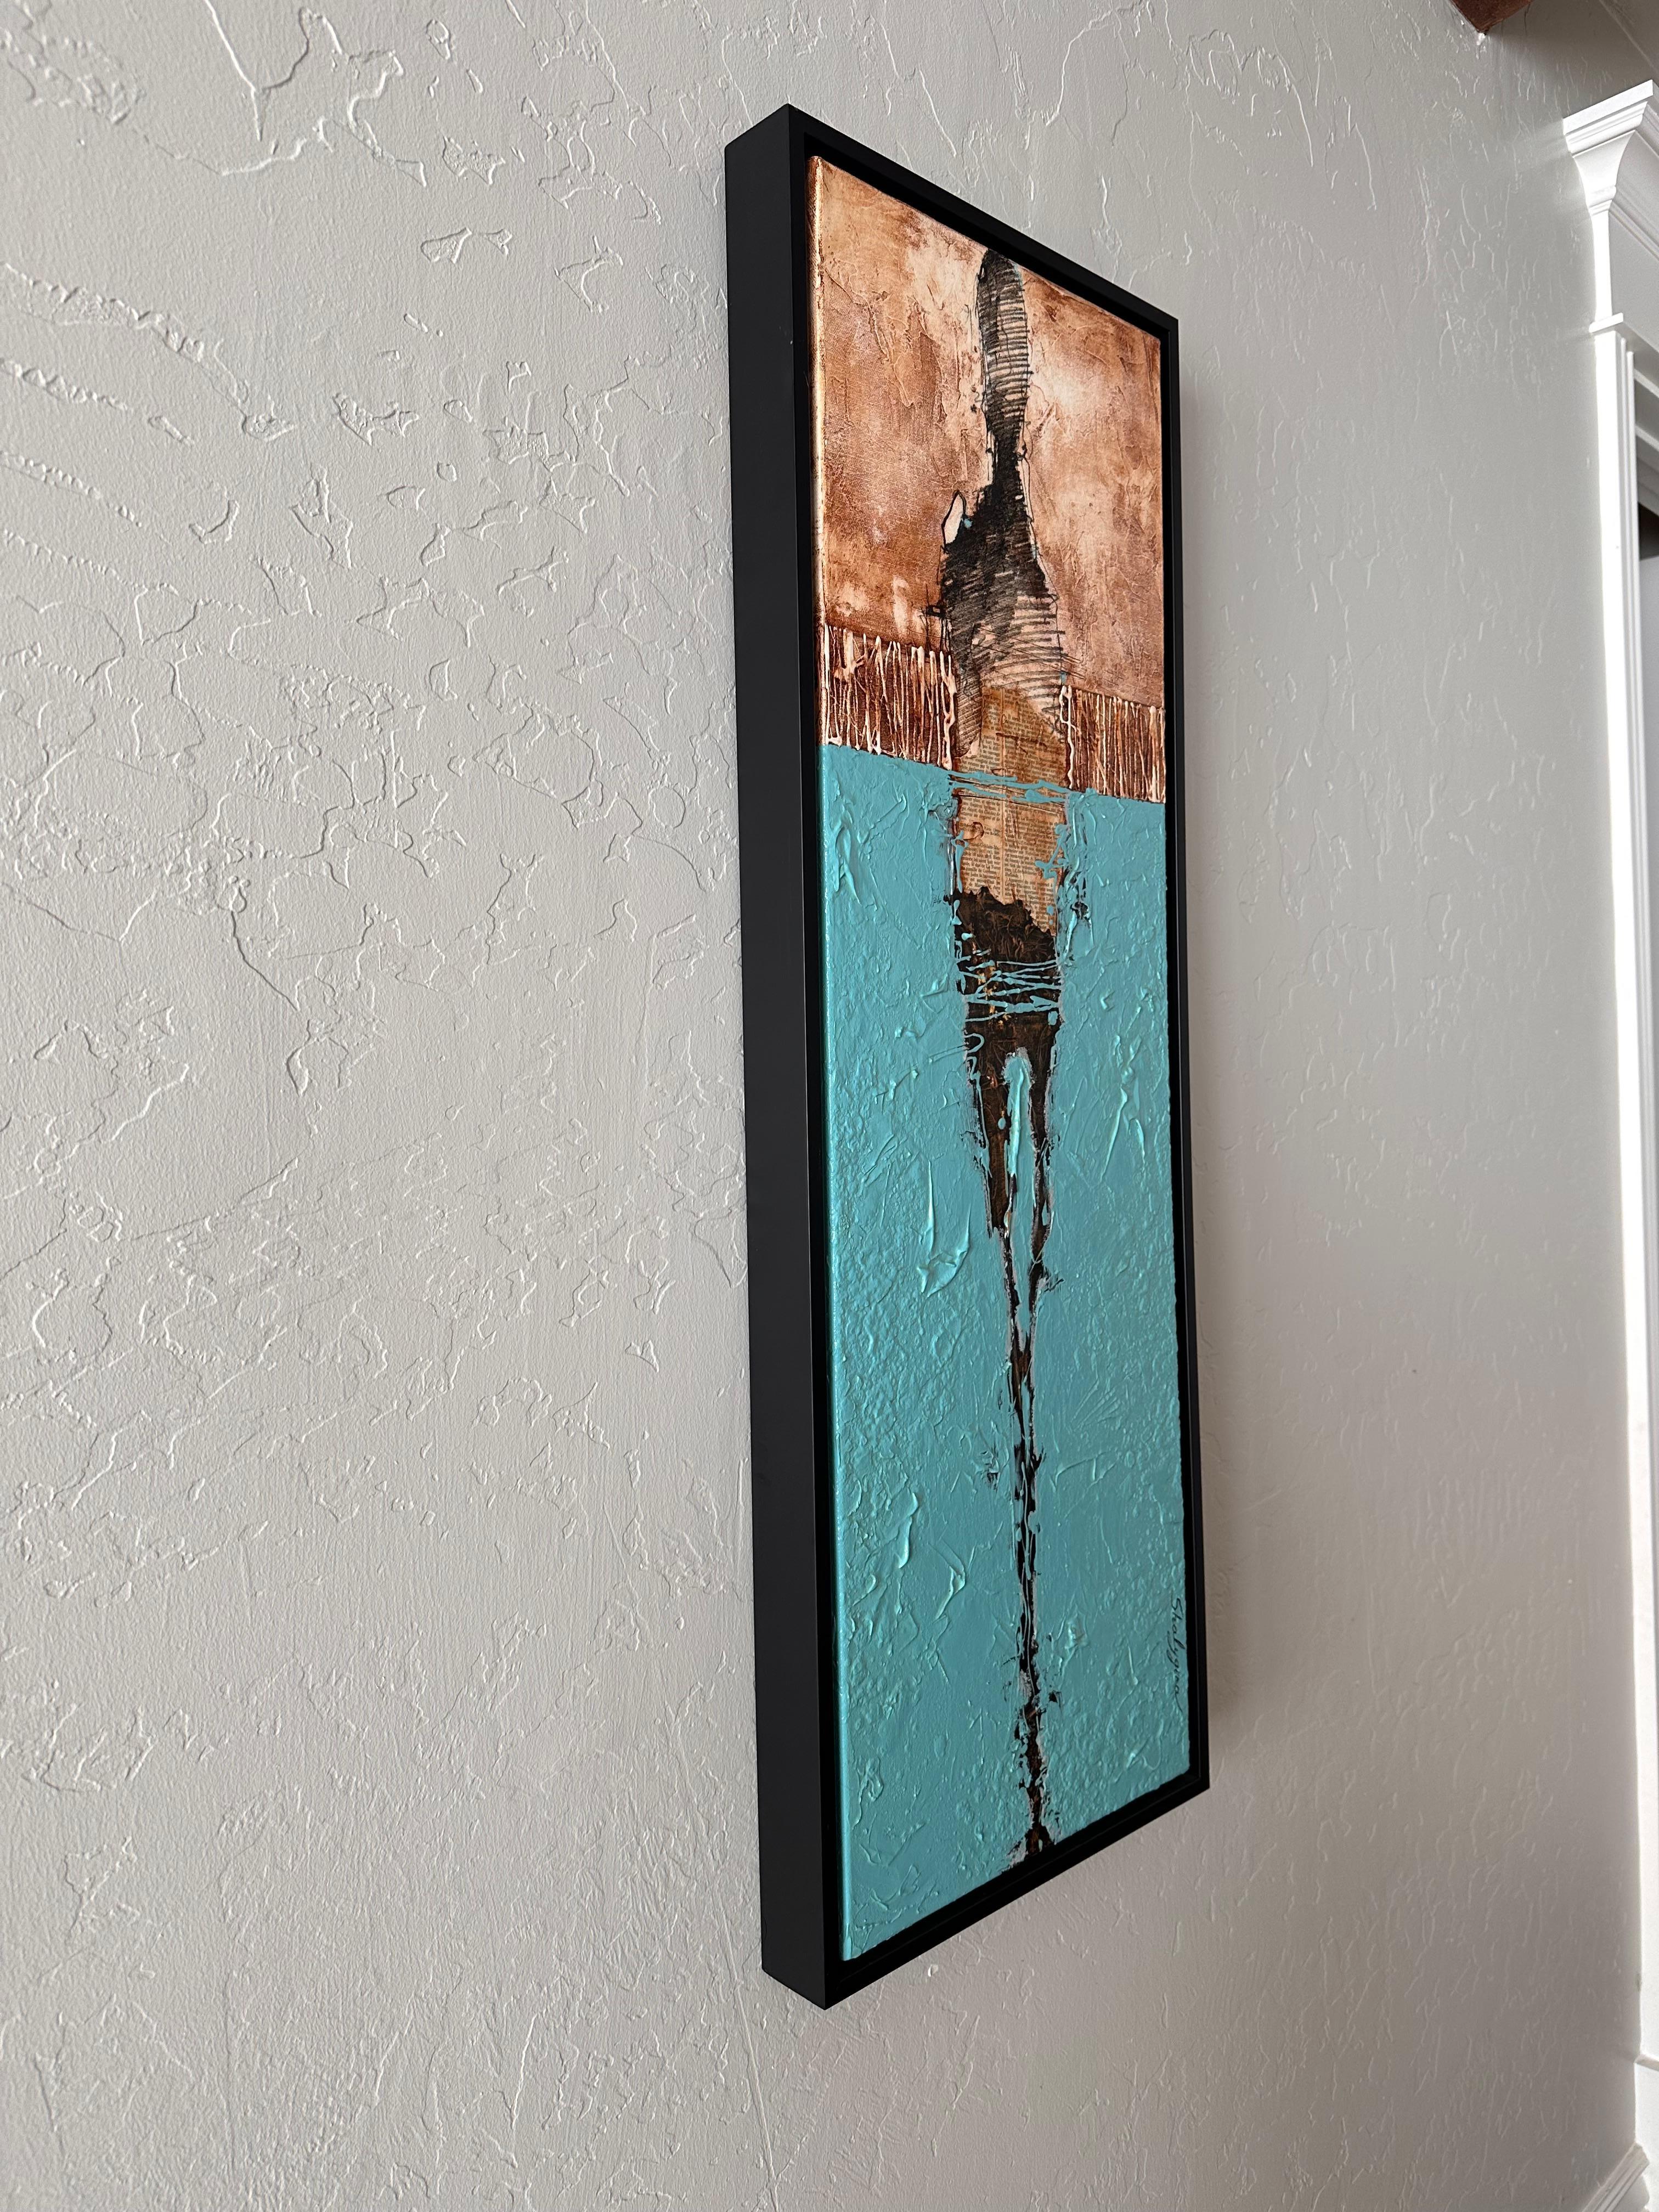 A unique figurative abstract, vibrant textured brown & teal create a bold original work of art. There is a unique range of expressionistic strokes, textures and text incorporated in this Contemporary painting by Svetlana Shalygina. Framed in a black